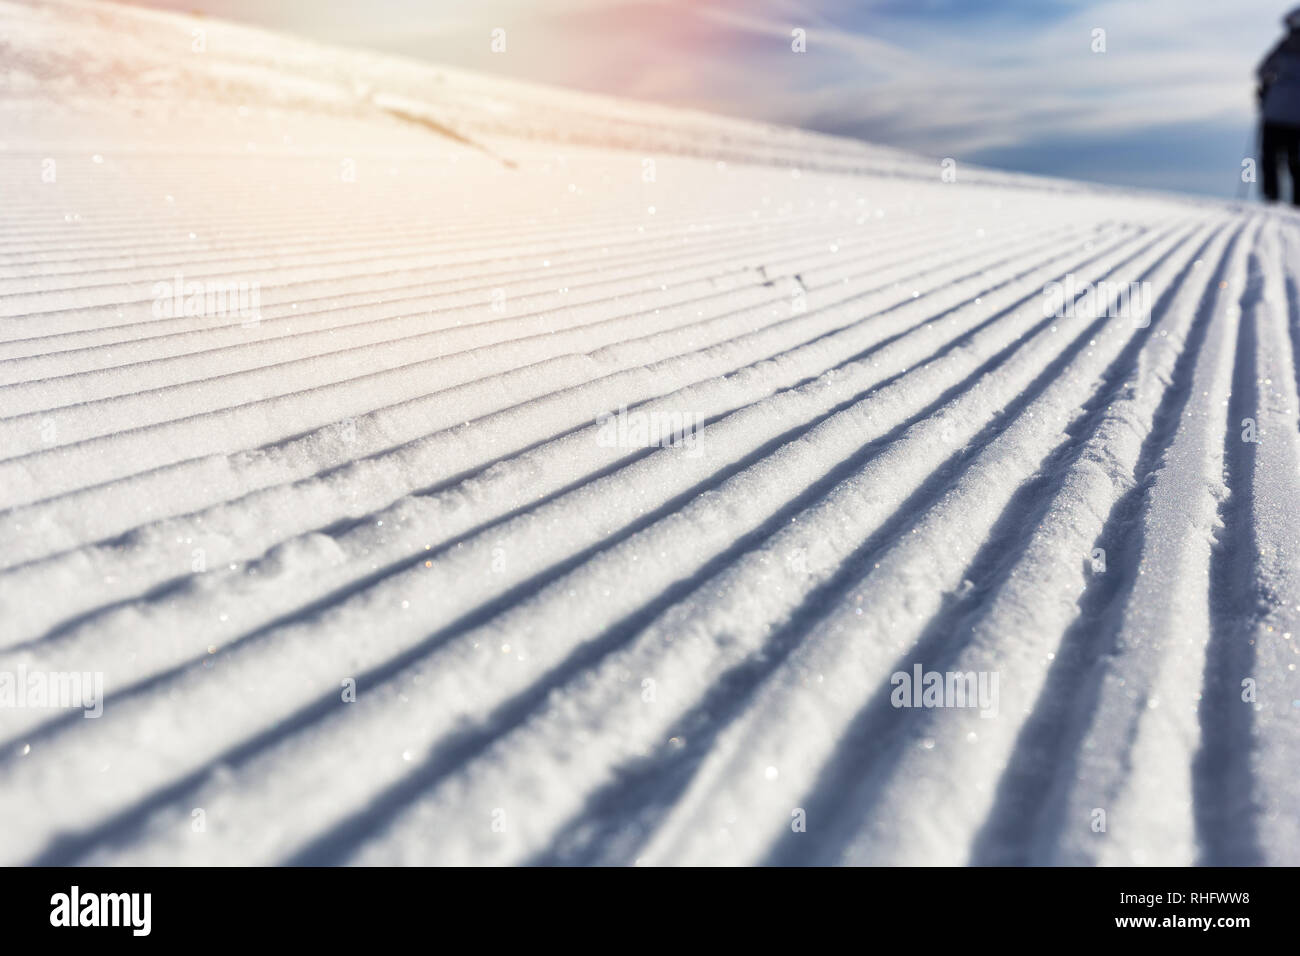 Close-up groomed snow at ski resort, slope banner background texture Stock Photo